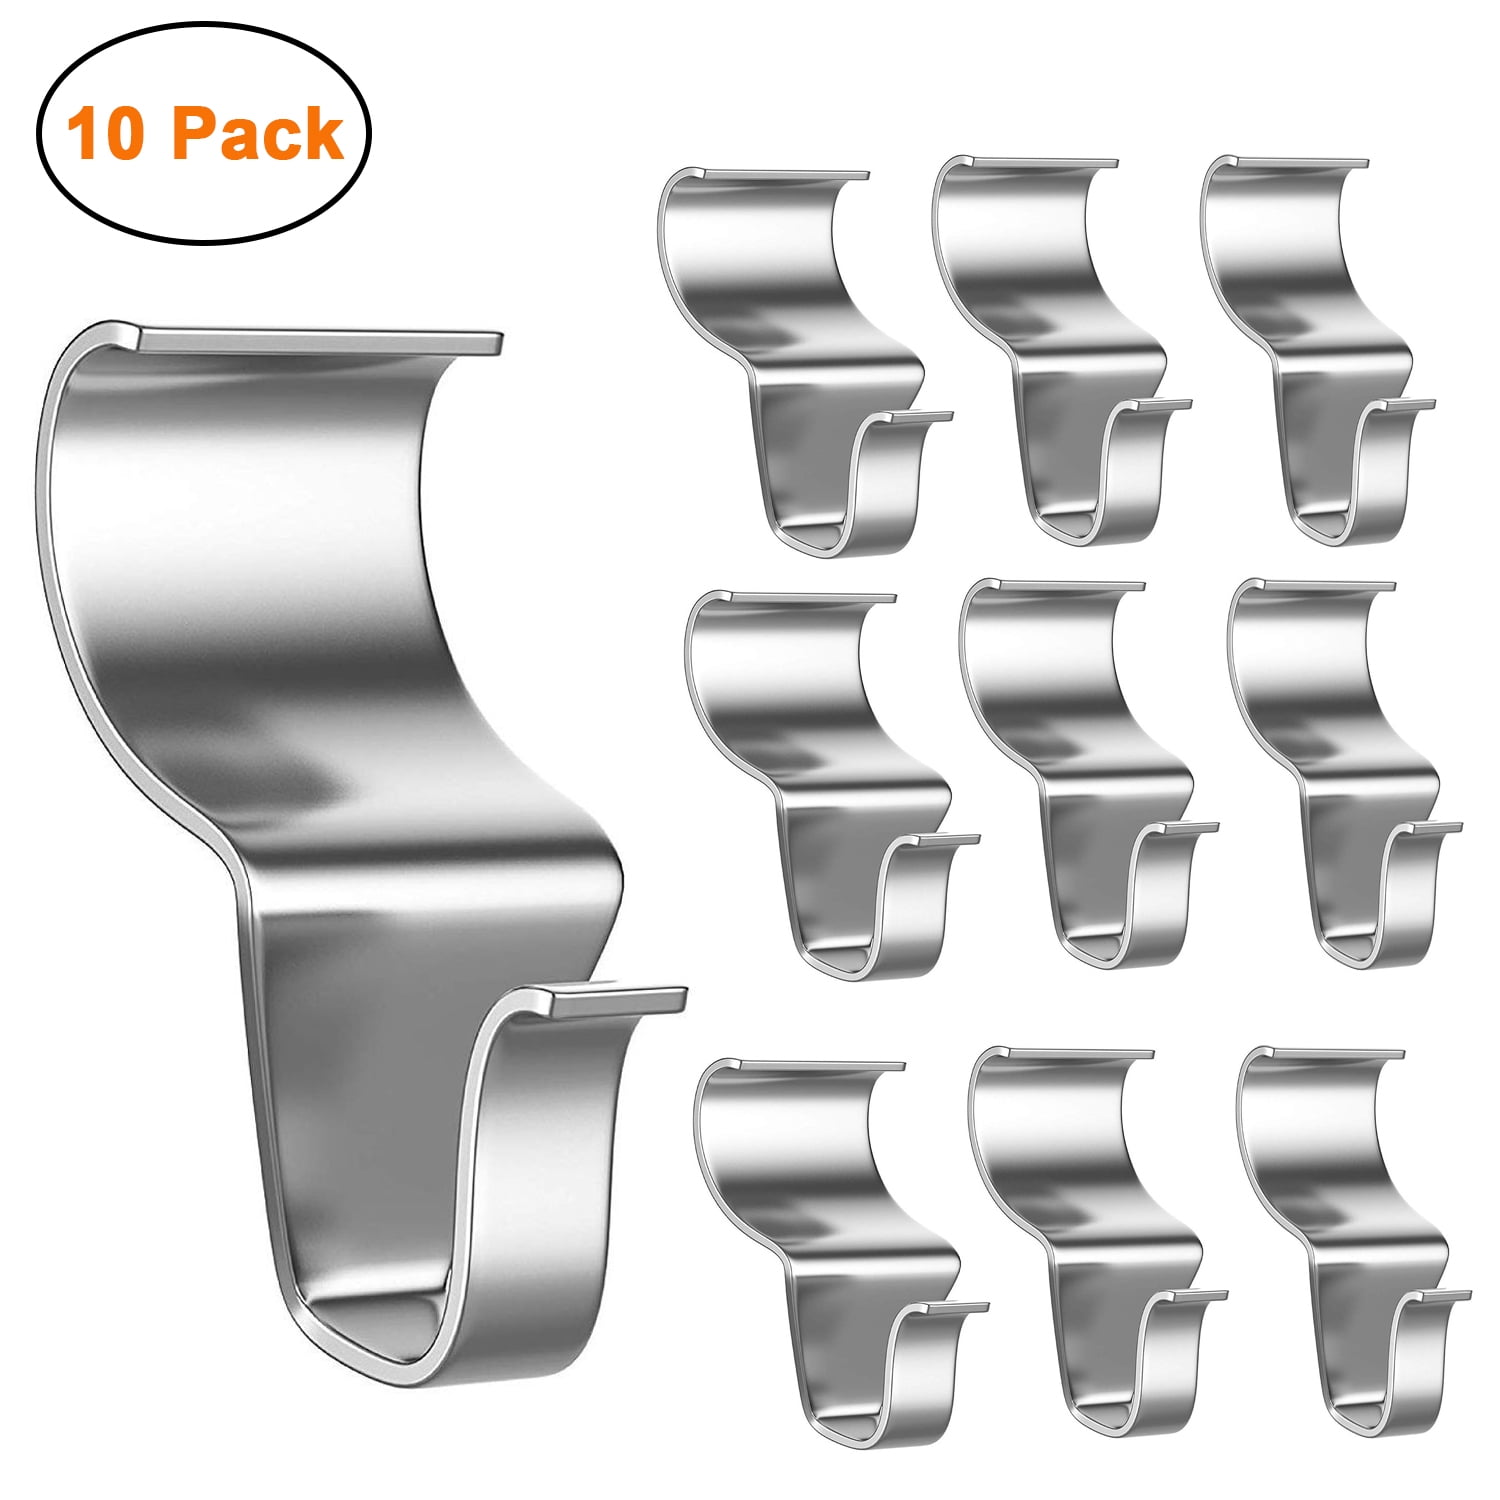 Eatelle No-Hole Needed Hooks Low Profile Vinyl Siding Clips for Hanging Hooks Heavy Duty Outdoor Light Mailbox Planter Decorations Wreath Hanger